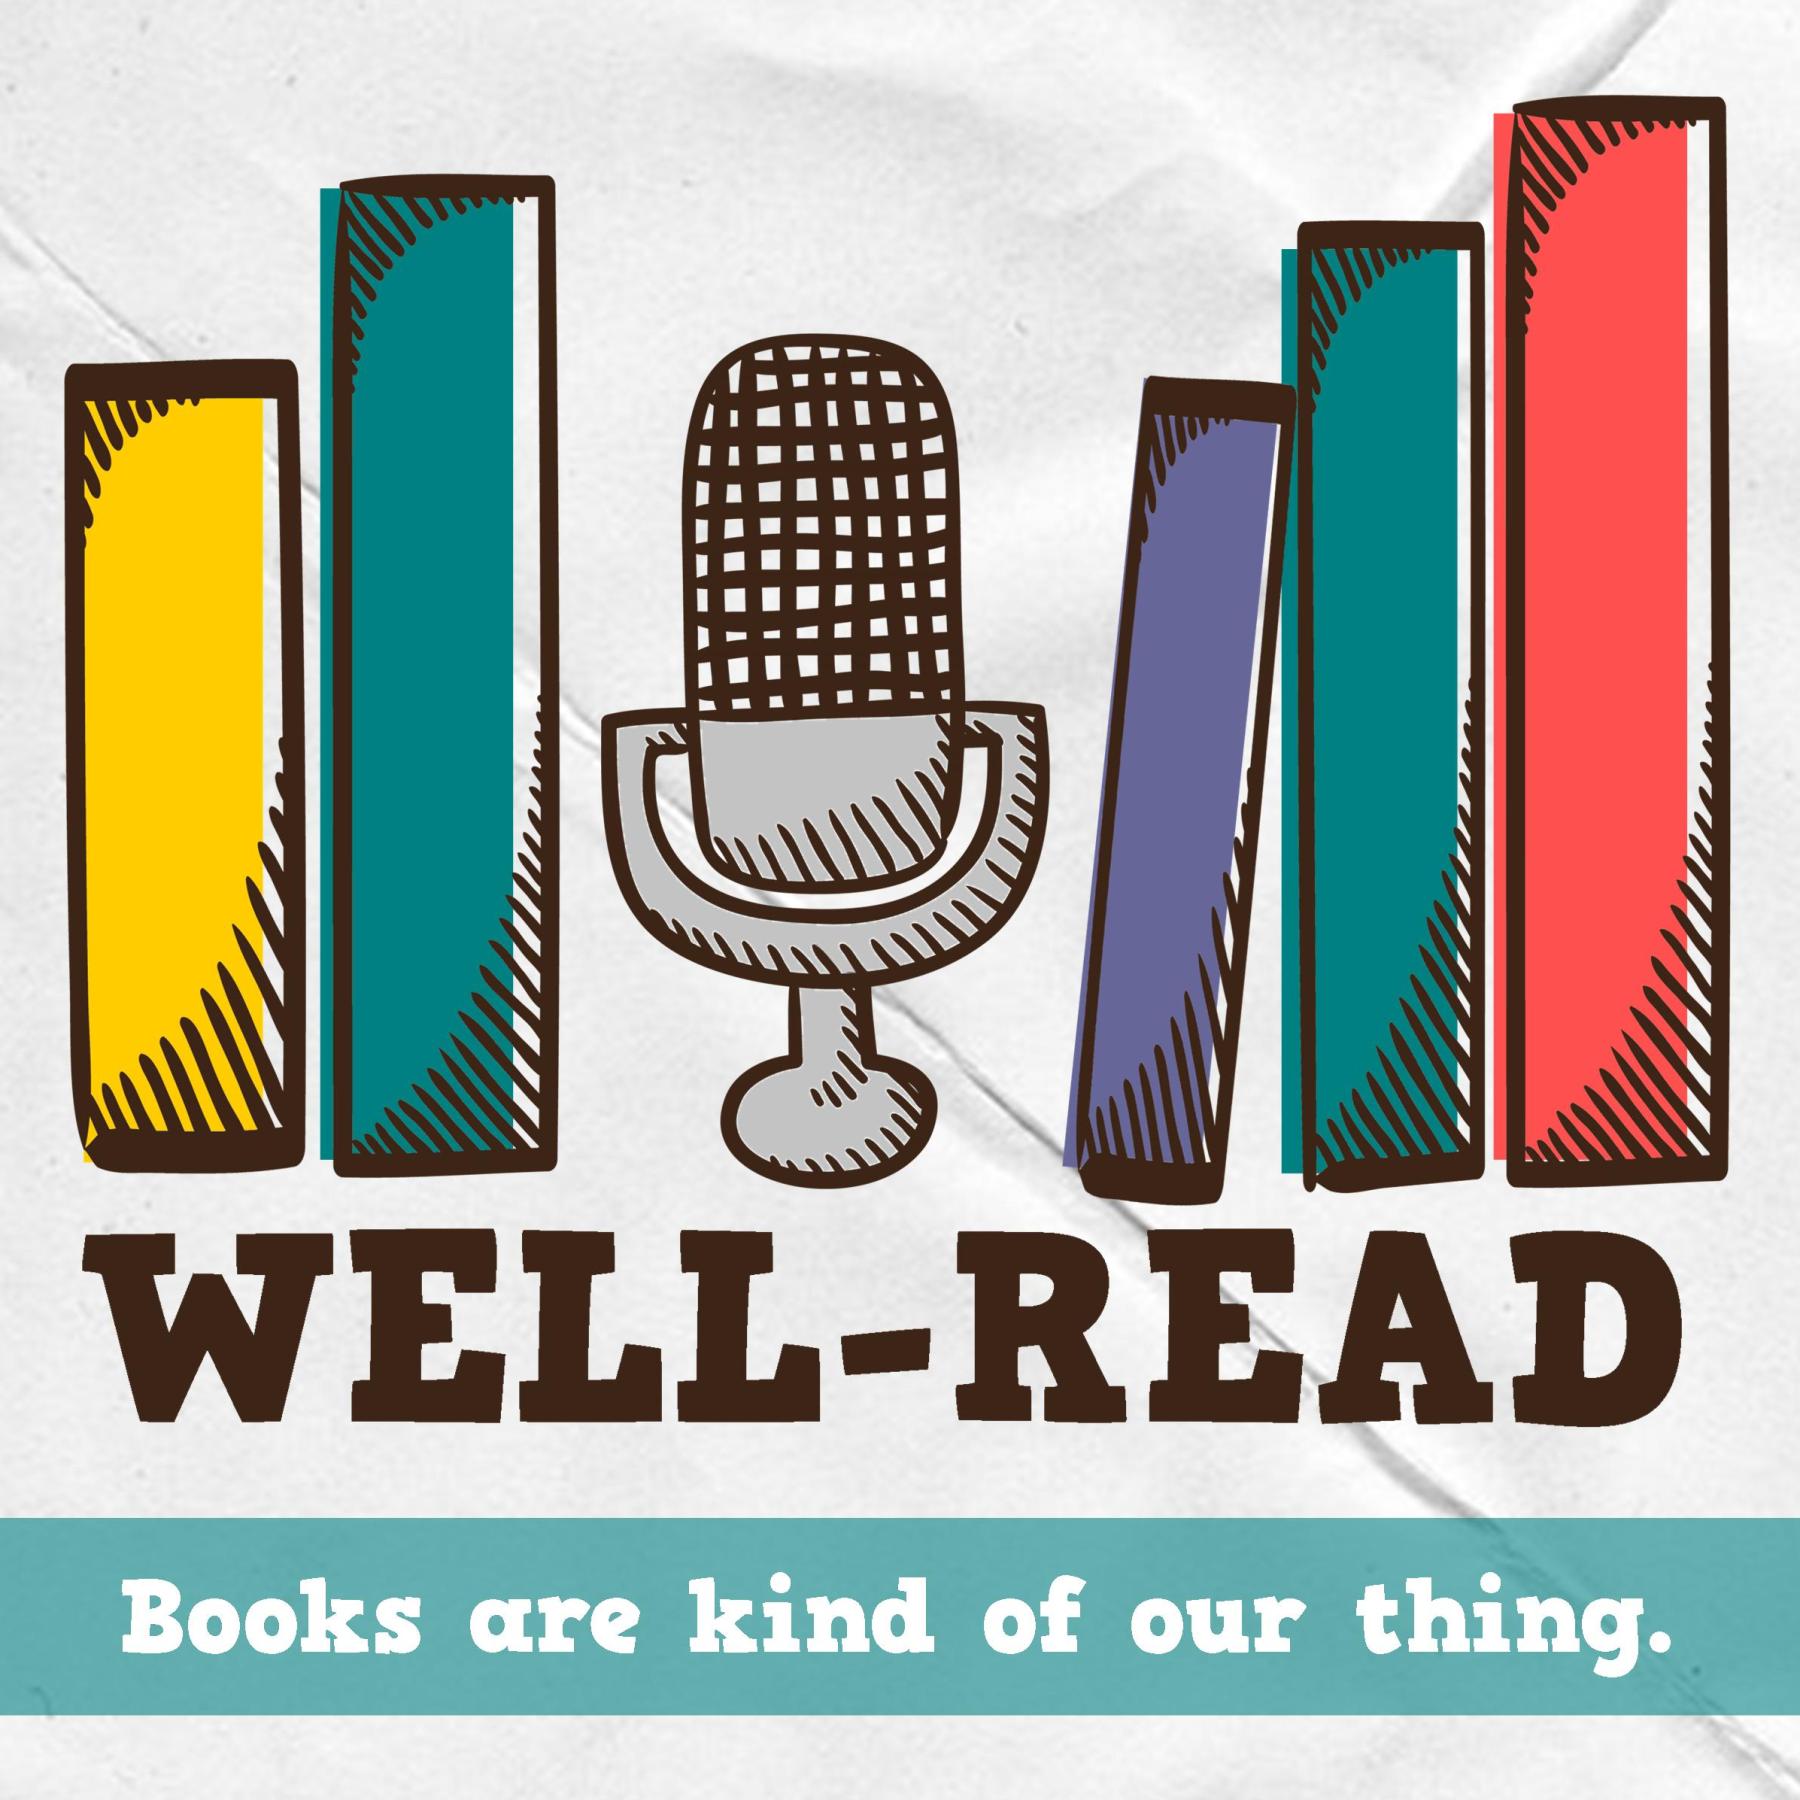 Well-Read episode #25 - Books about food